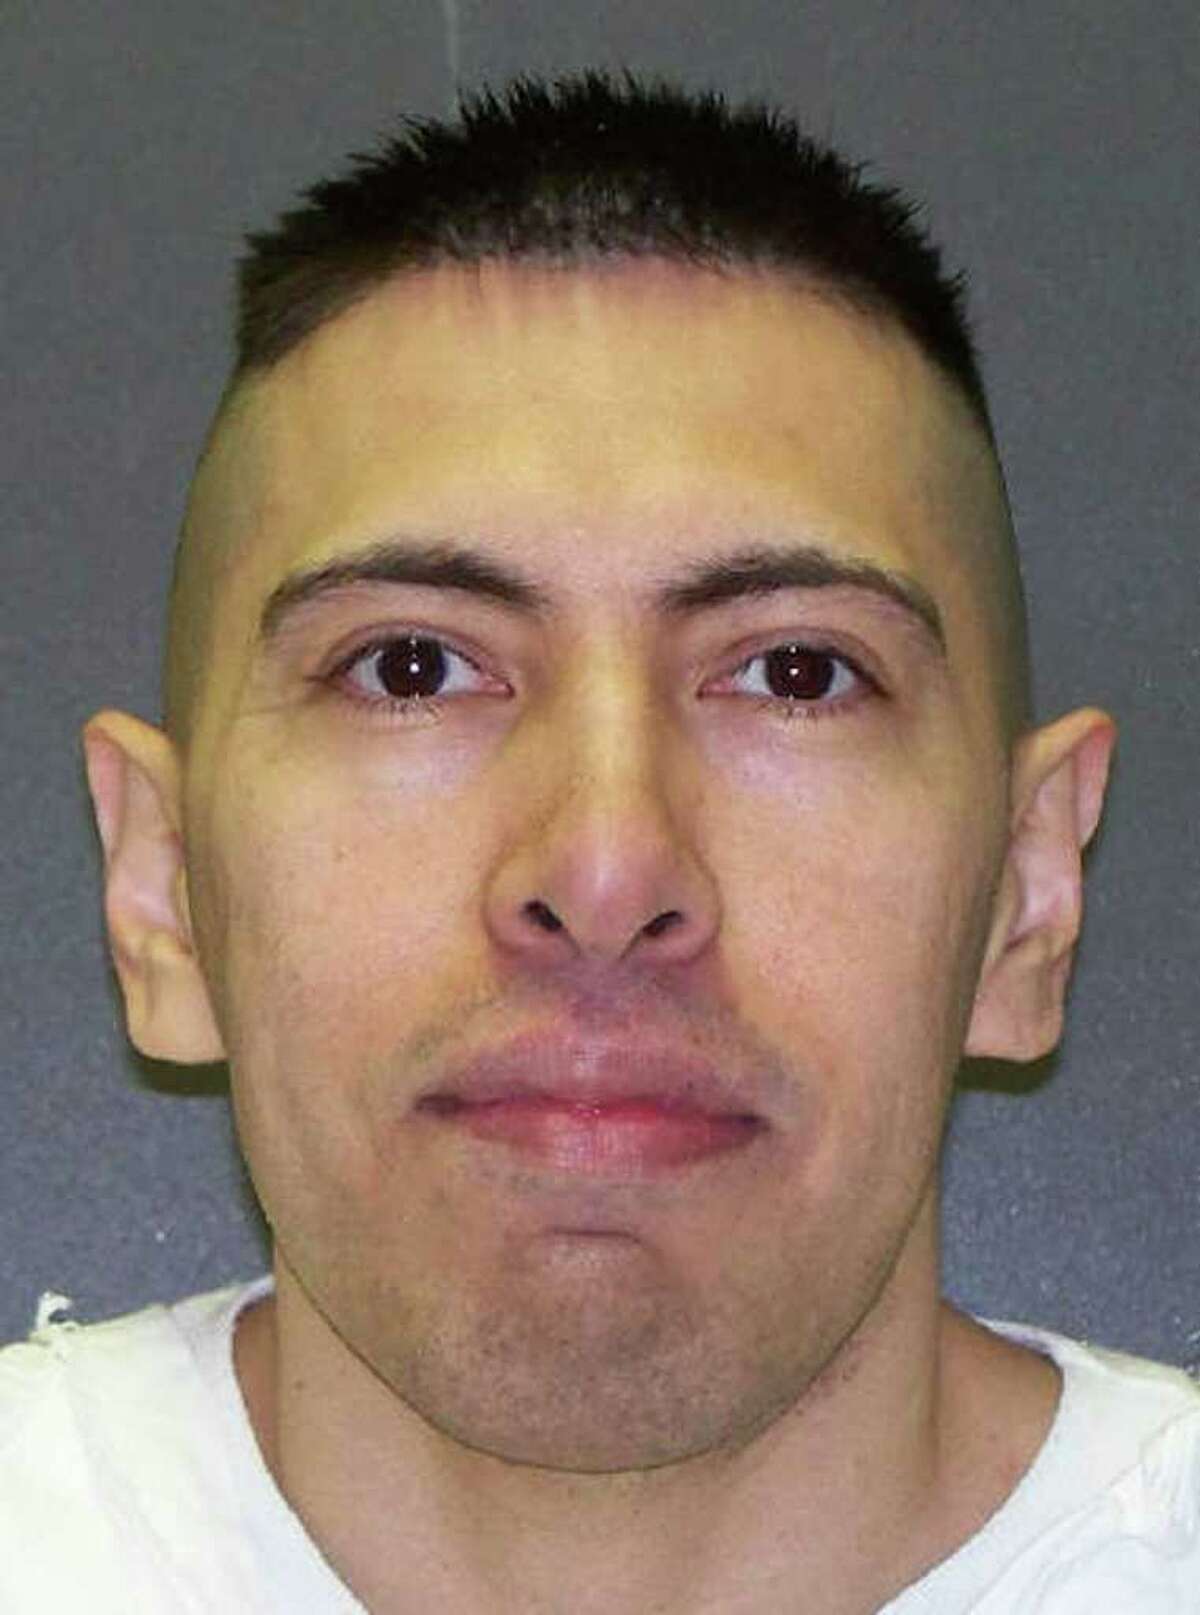 This photo provided Oct. 25, 2011, by the Texas Department of Criminal Justice shows Frank Garcia. Garcia is set for lethal injection Thursday, Oct. 27, 2011, for death of police Sgt. Hector Garza more than a decade ago during a domestic violence call. Garcia also killed his wife in the same shooting outburst.